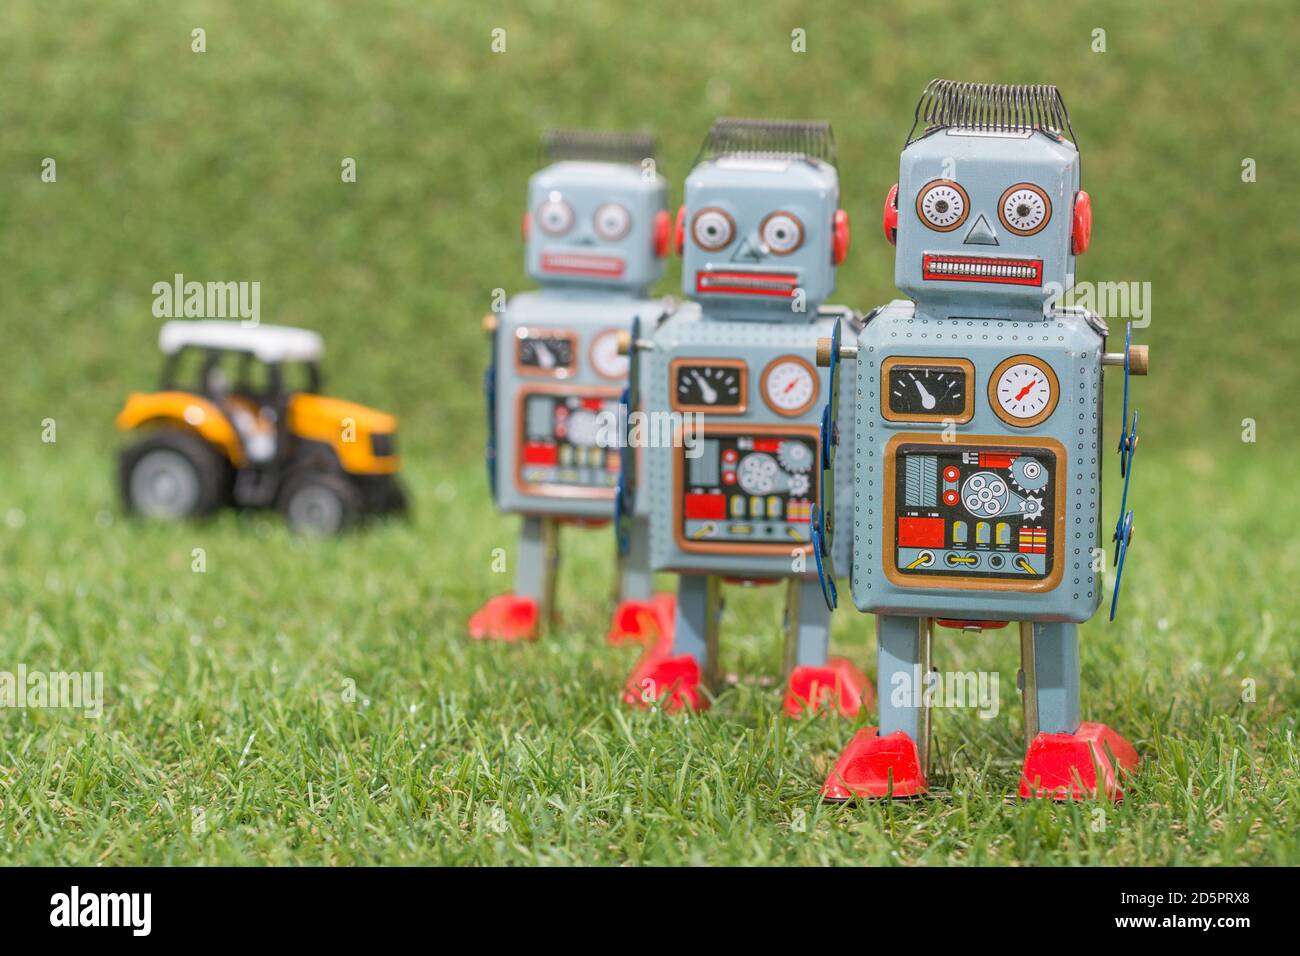 Wind-up clockwork toy robot on fake grass. For troll farm, Russian bots meddling in US American election, Russia trolls & bots, trolling, advances AI Stock Photo